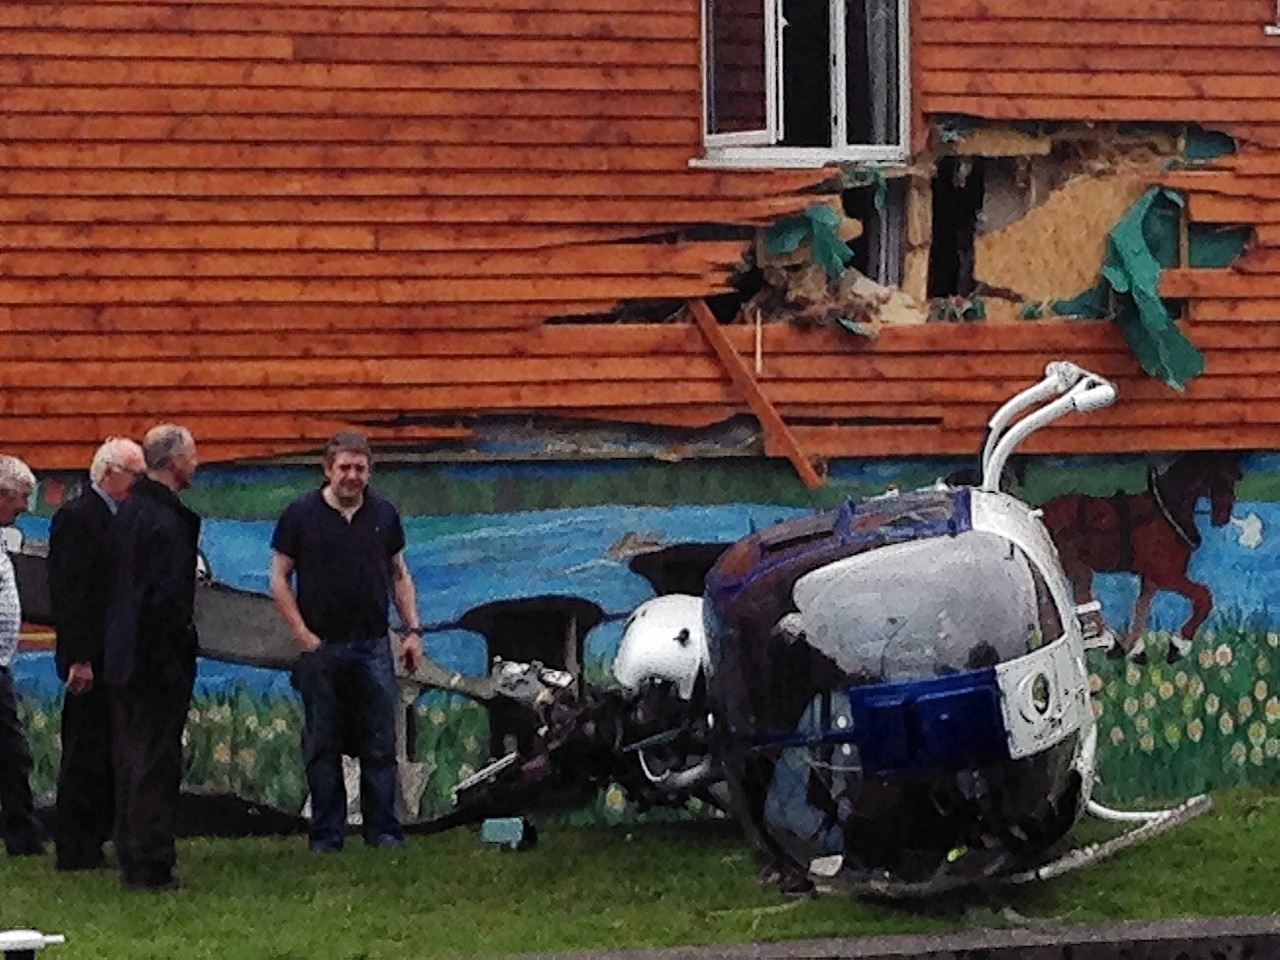 The scene across the Royal Canal of the wreckage of a helicopter crash and damage to the rear of the Rustic Inn, Abbeyshrule, Co Longford. PRESS ASSOCIATION Photo. Picture date: Thursday July 16, 2015. The publican and his wife, Teddy and Betty McGoey, narrowly escaped the force of a blast when a helicopter crashed into their canal side pub.